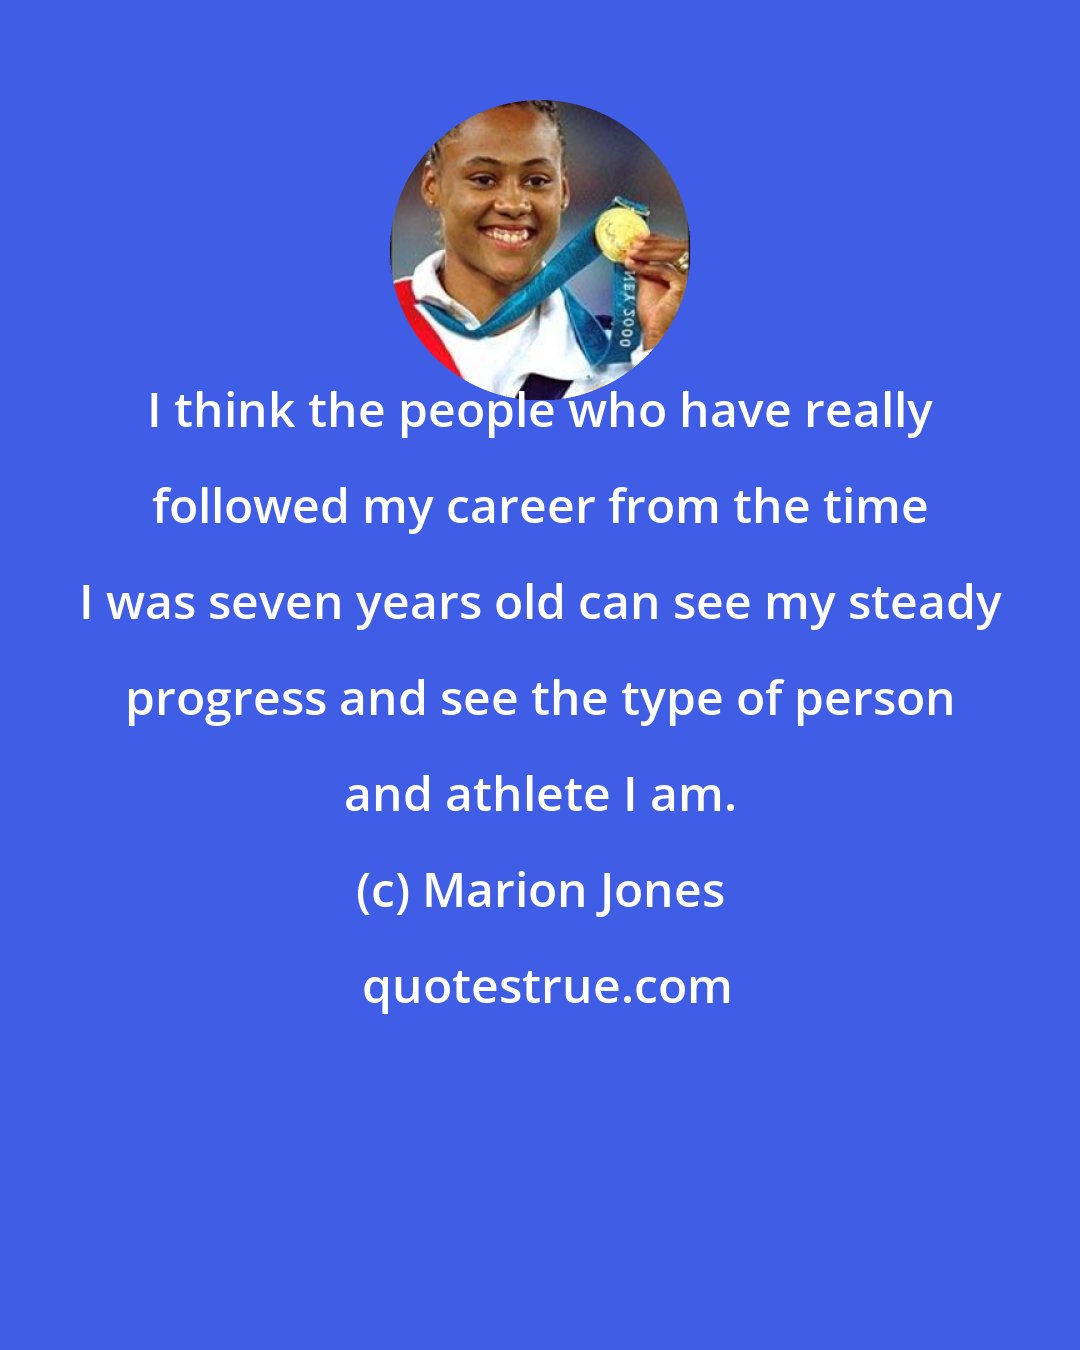 Marion Jones: I think the people who have really followed my career from the time I was seven years old can see my steady progress and see the type of person and athlete I am.